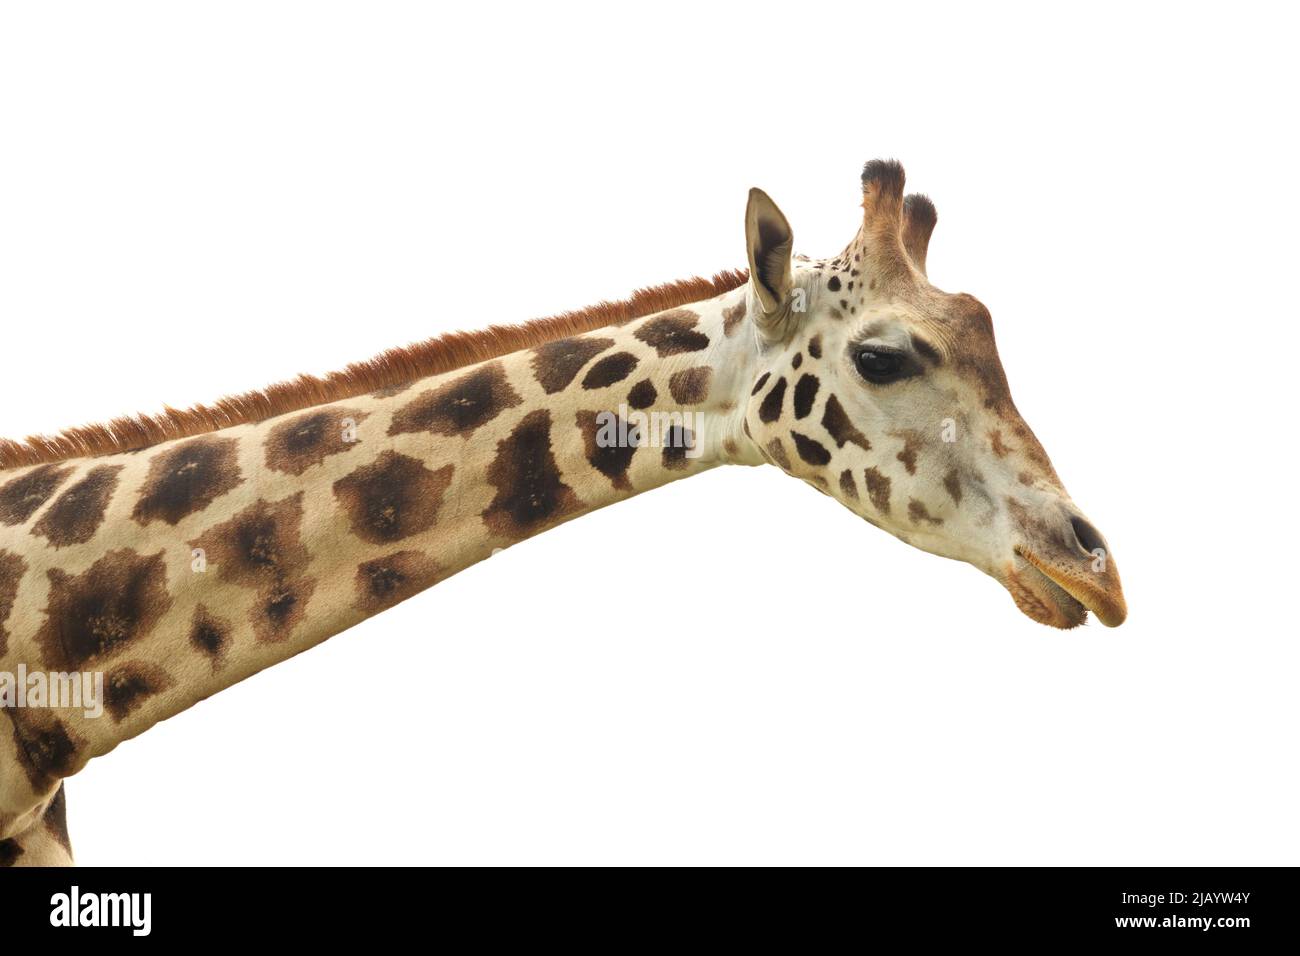 Close up of Giraffe Face, Neck, and Head Isolated on White Background Stock Photo